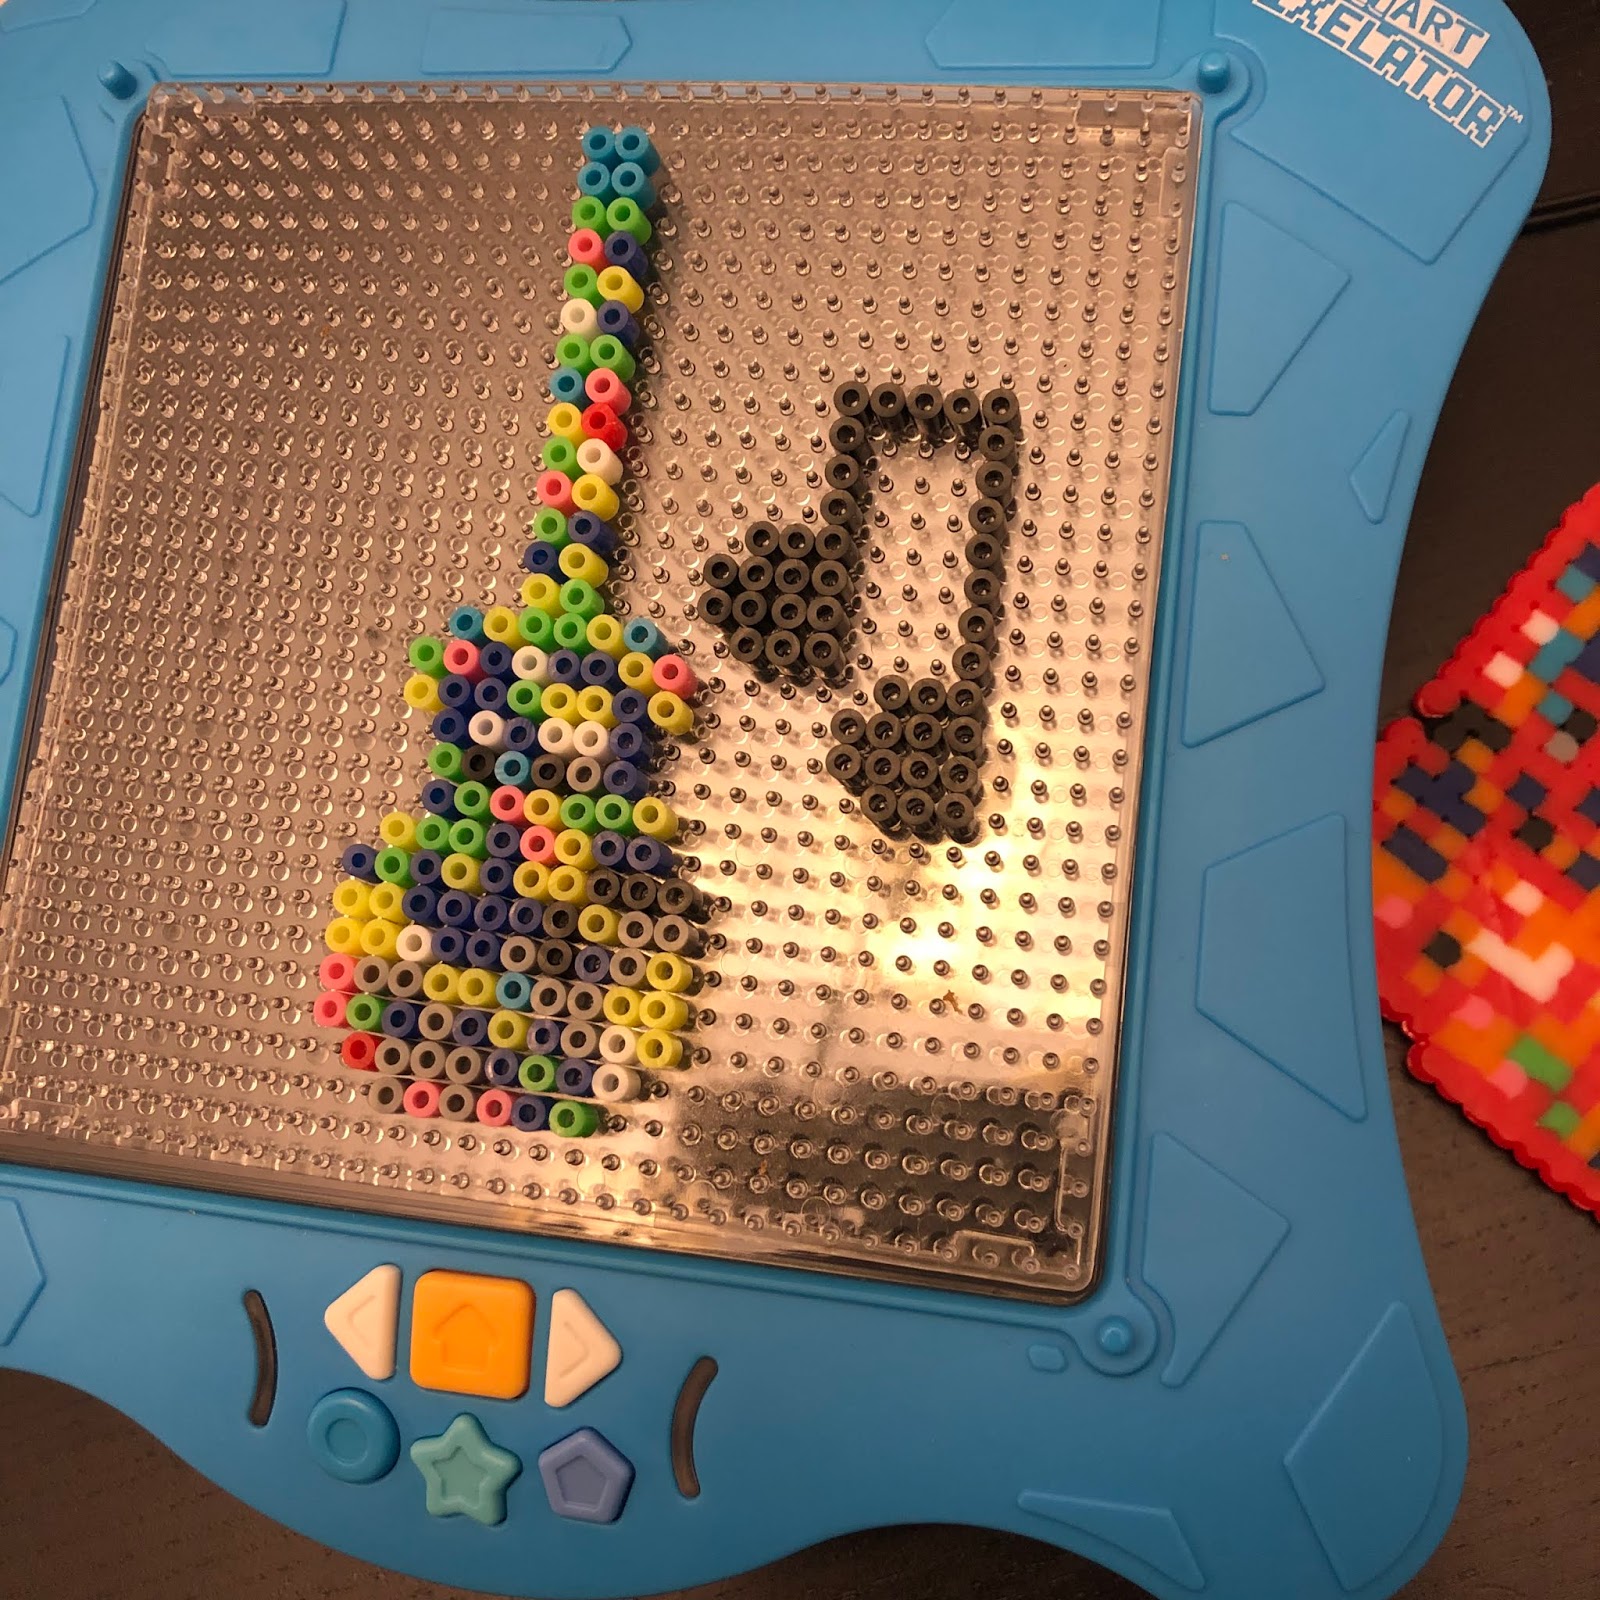 Turn Any Image into a Pixel Artwork with the smART Pixelator